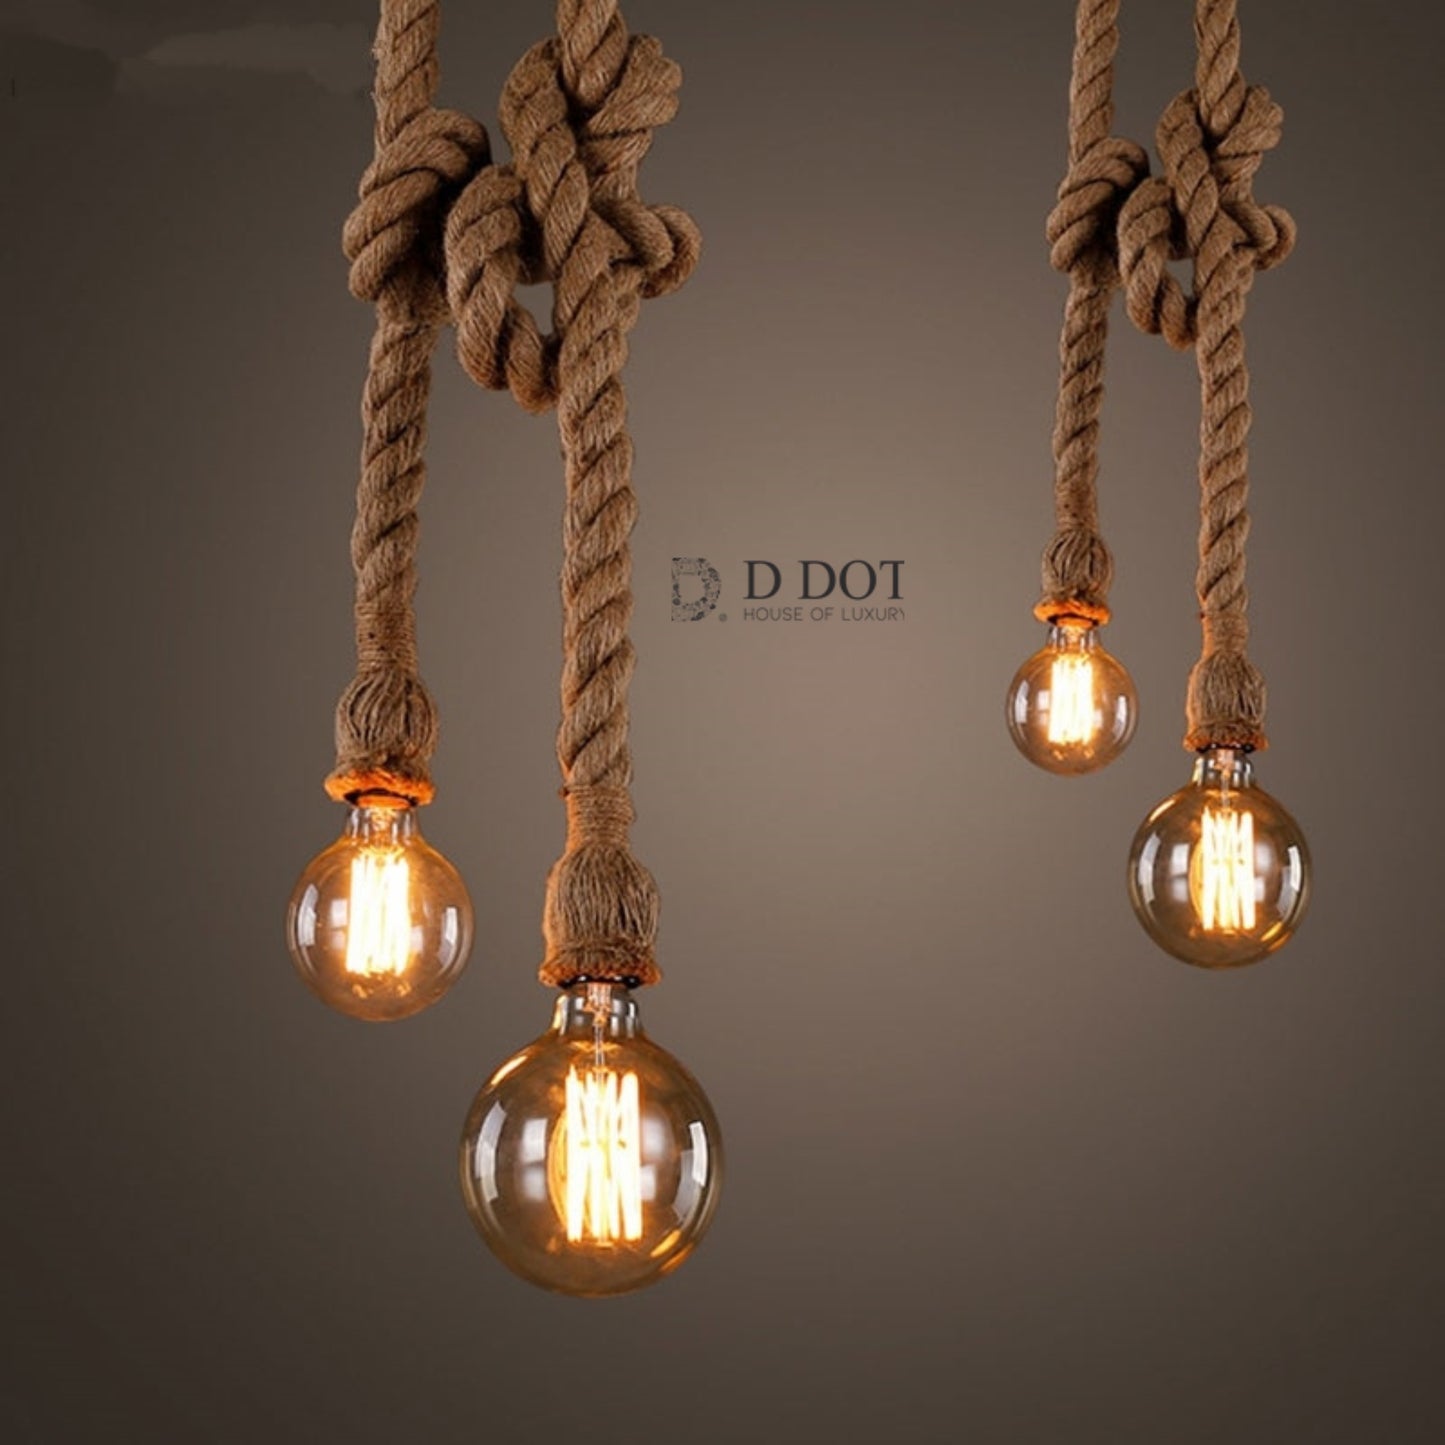 "Rope Electric Wire Lamp Holder Cord - Vintage Style Pendant Lighting Fixture"